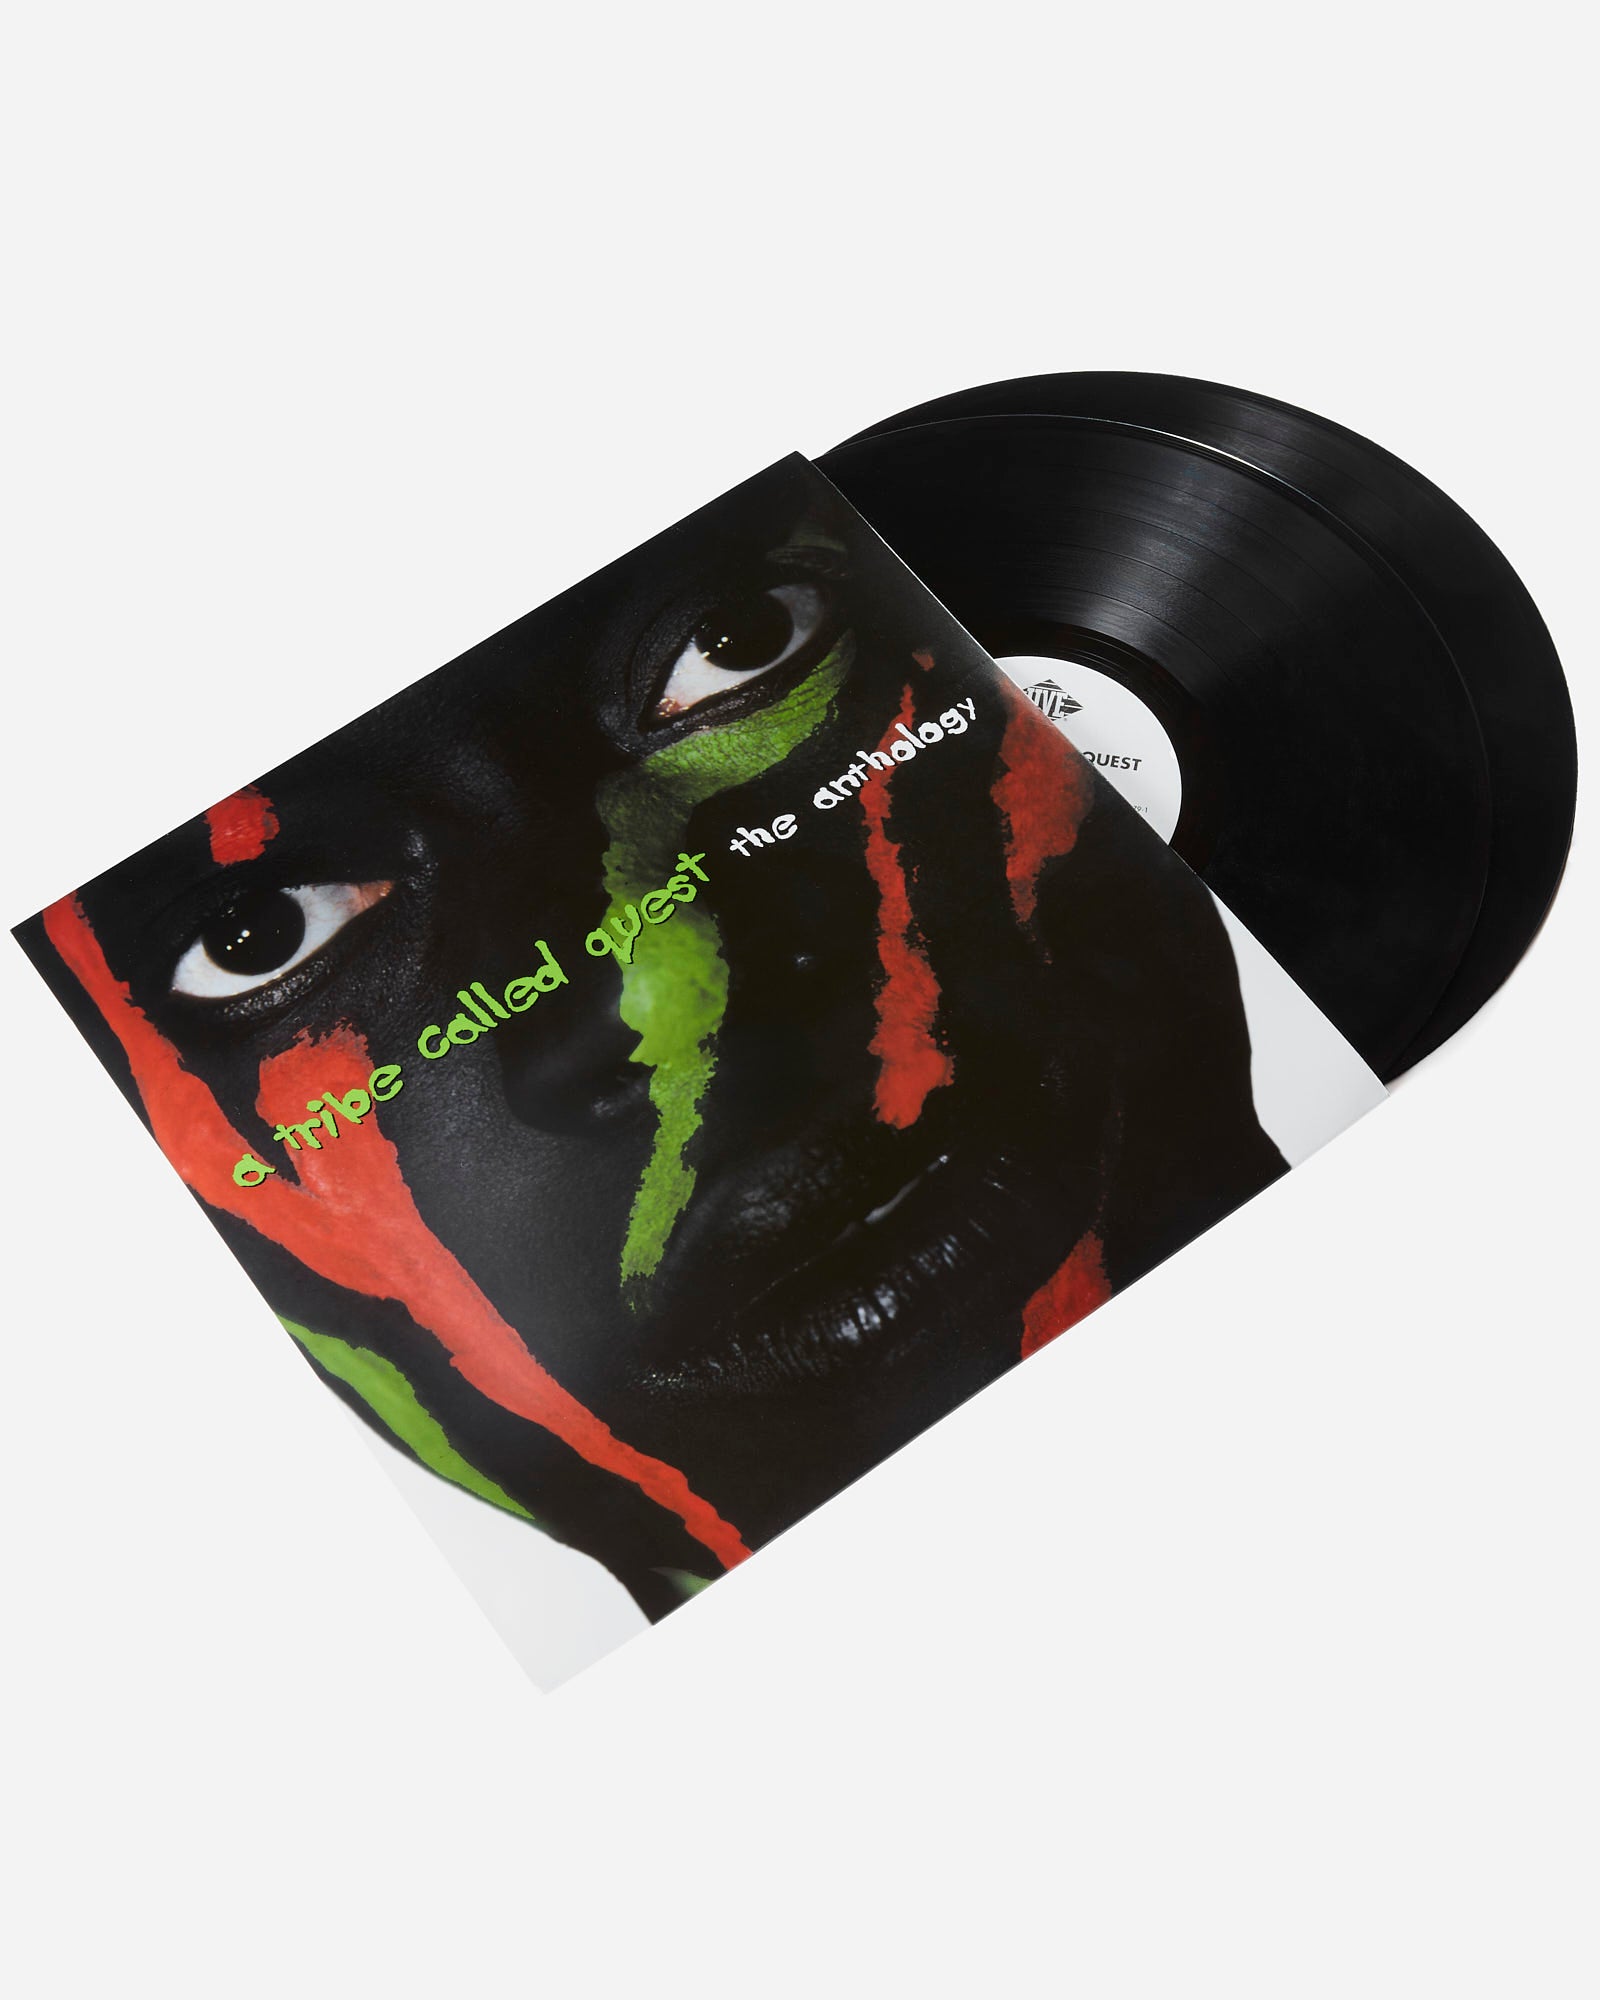 The Anthology Vinyl | ATCQ Official